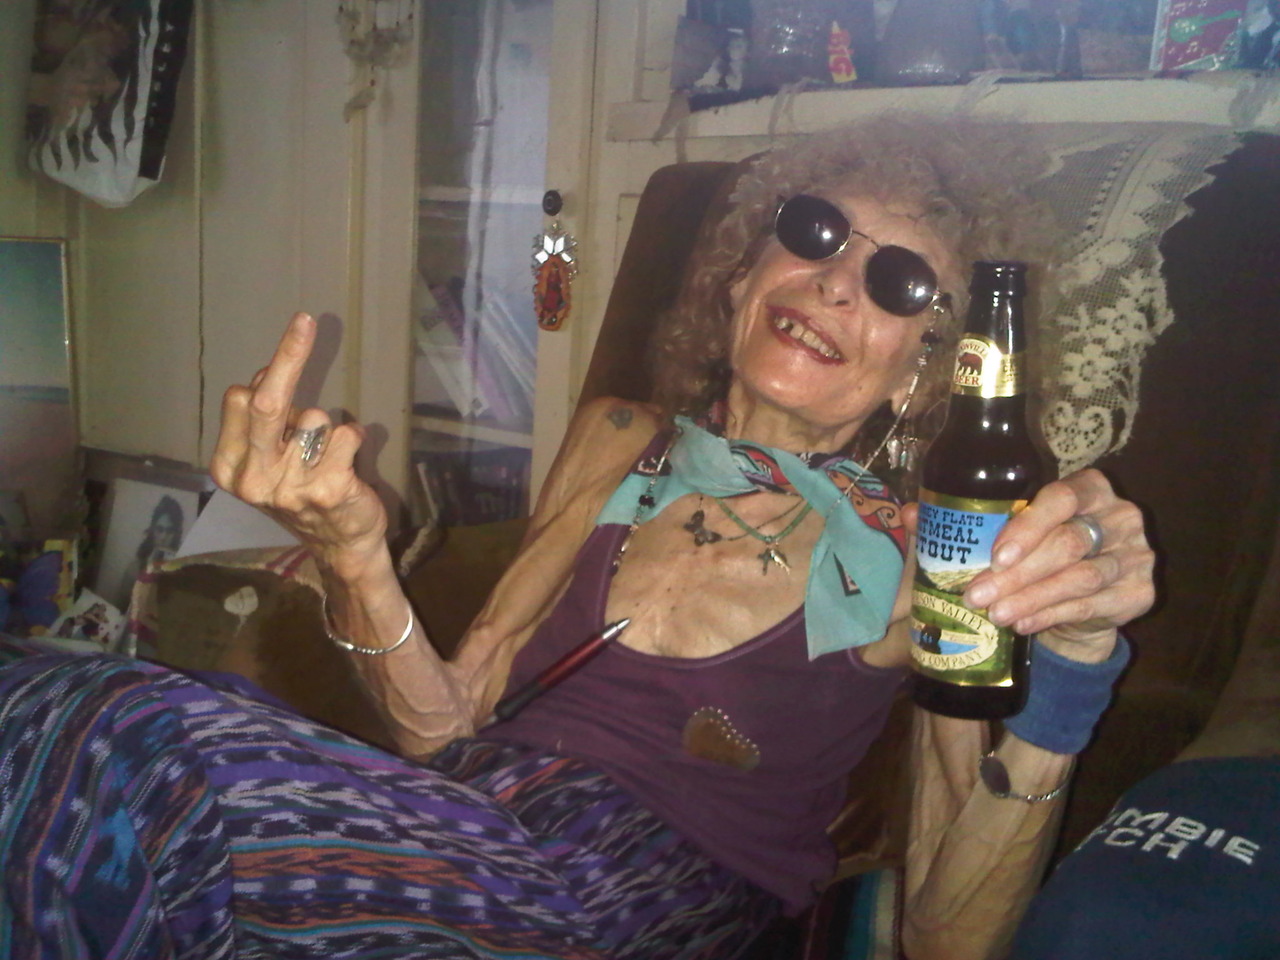 Drunk-Woman-Showing-Middle-Finger-Funny-Picture.jpg.